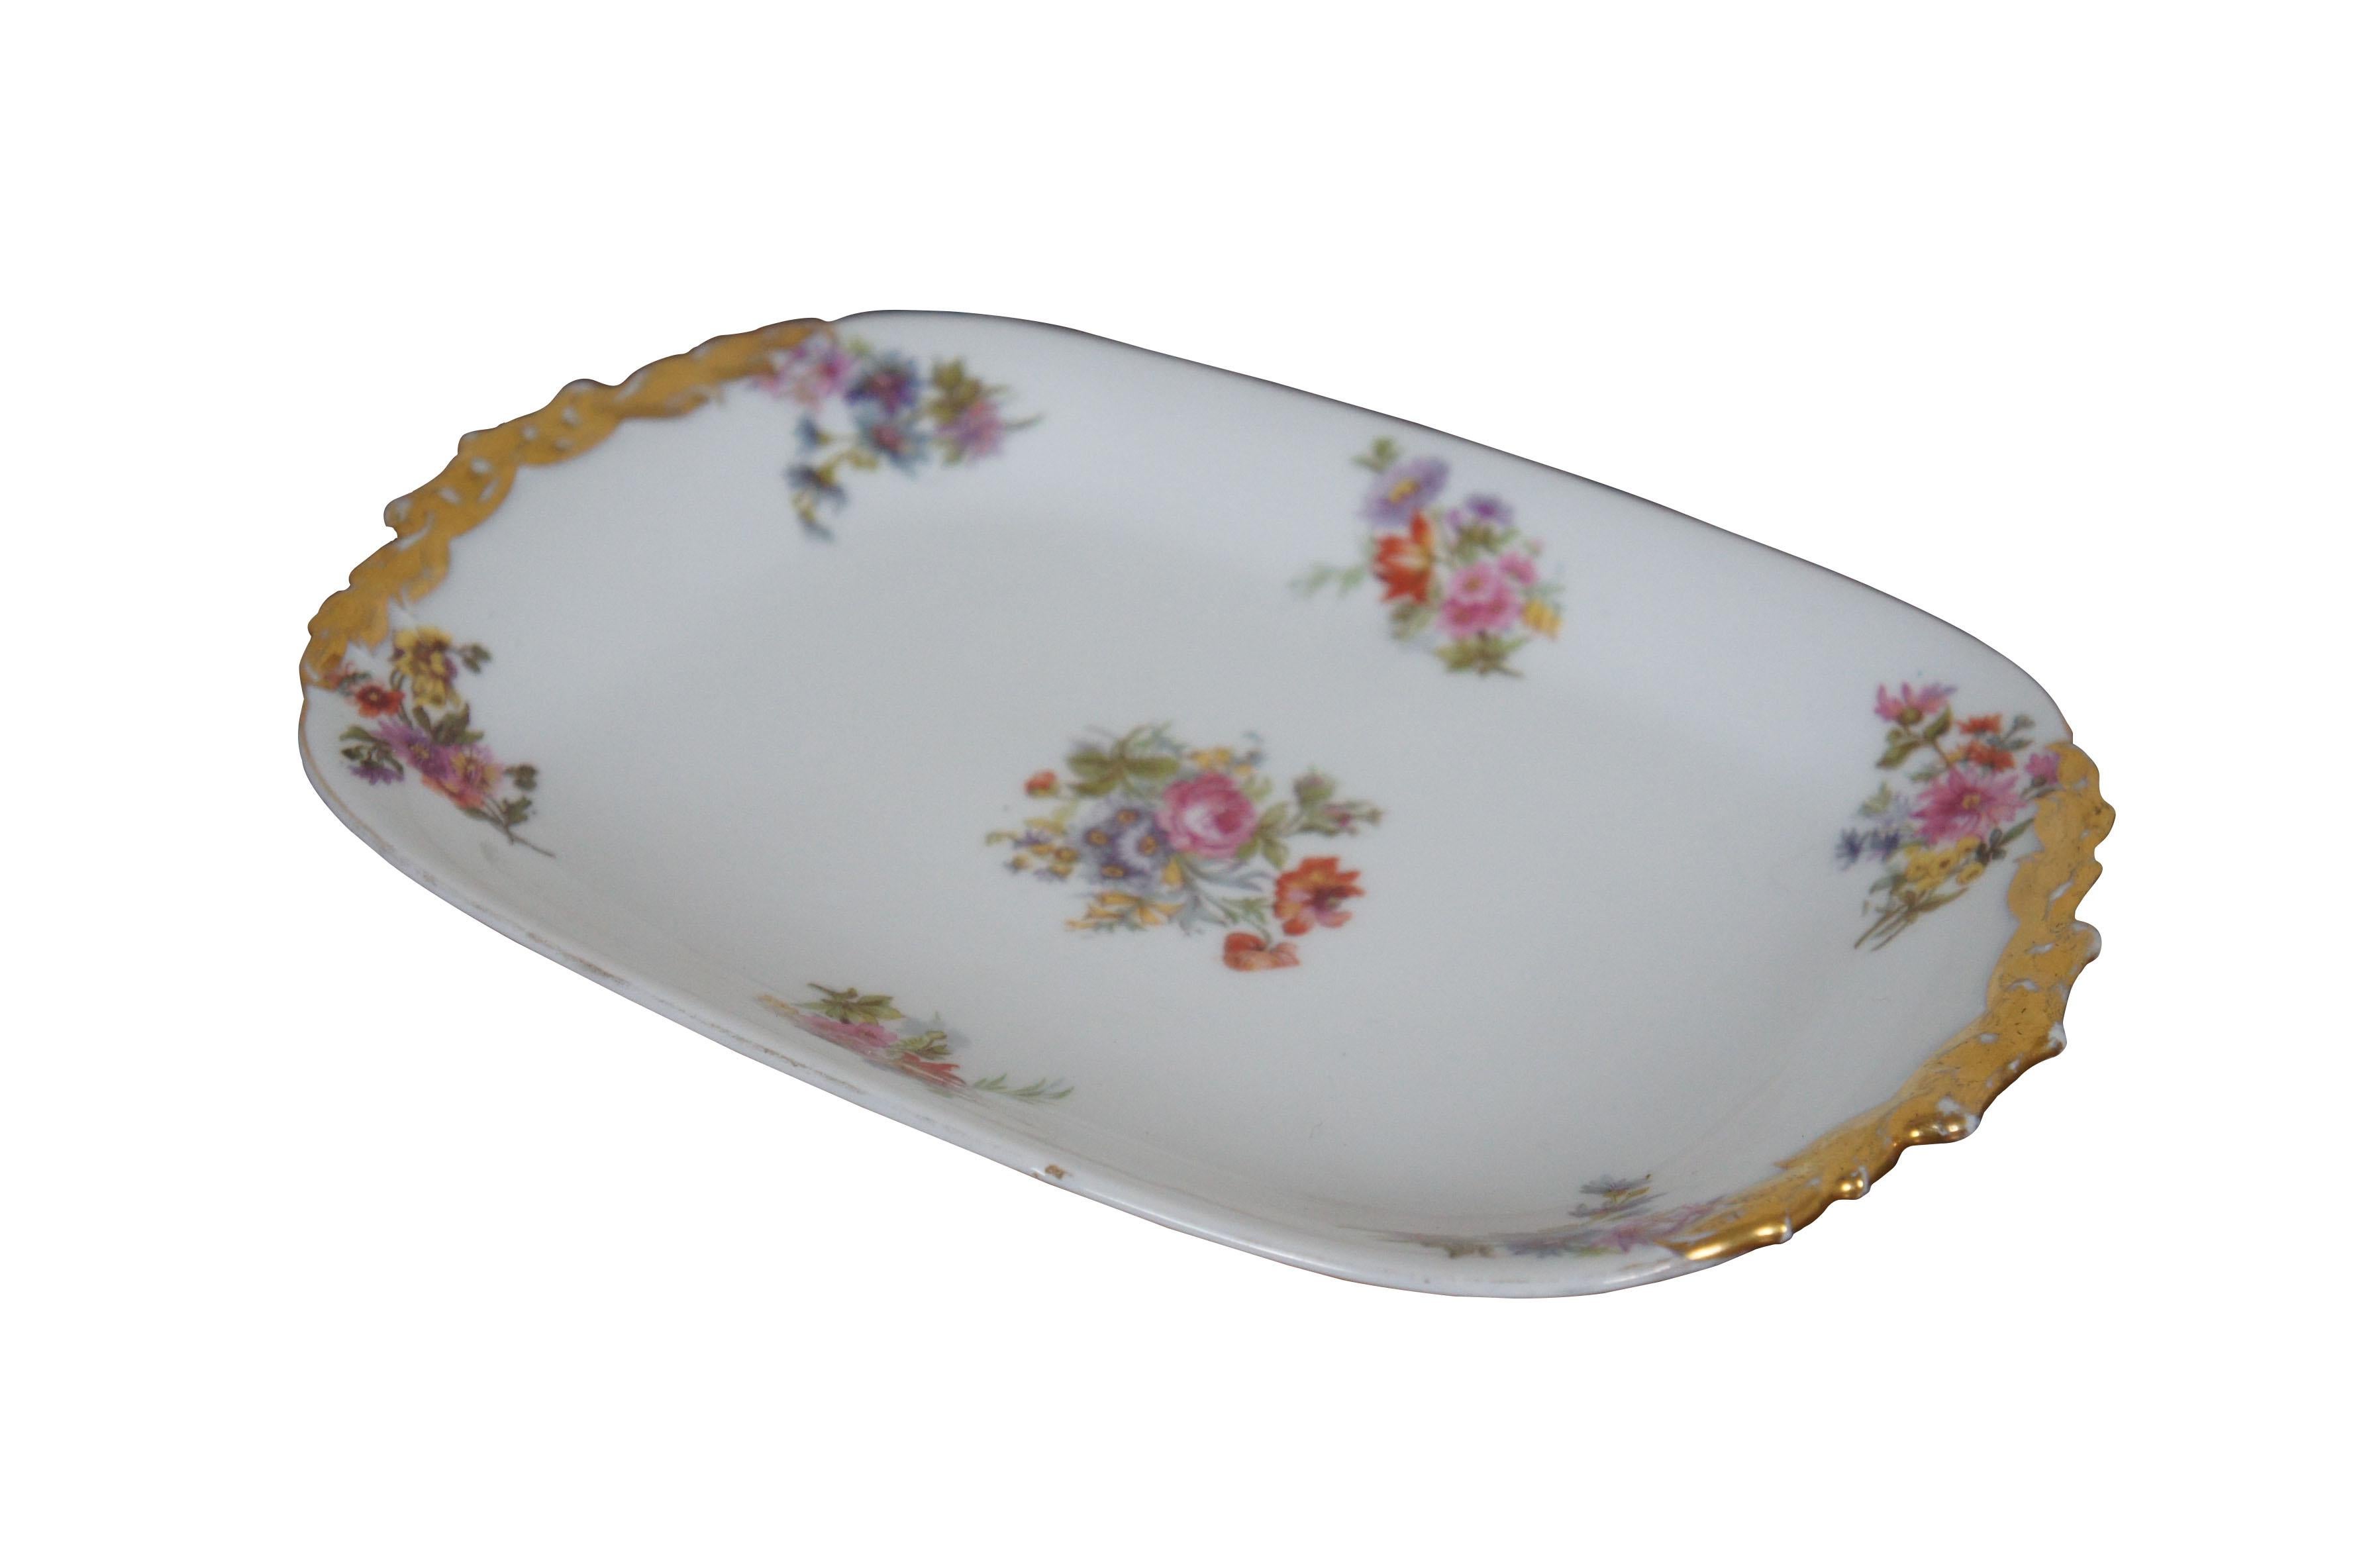 Early 20th century Limoges porcelain serving tray by Jean Pouyat. Rectangular form with gilded hand holds, decorated with litho print floral bouquets.

